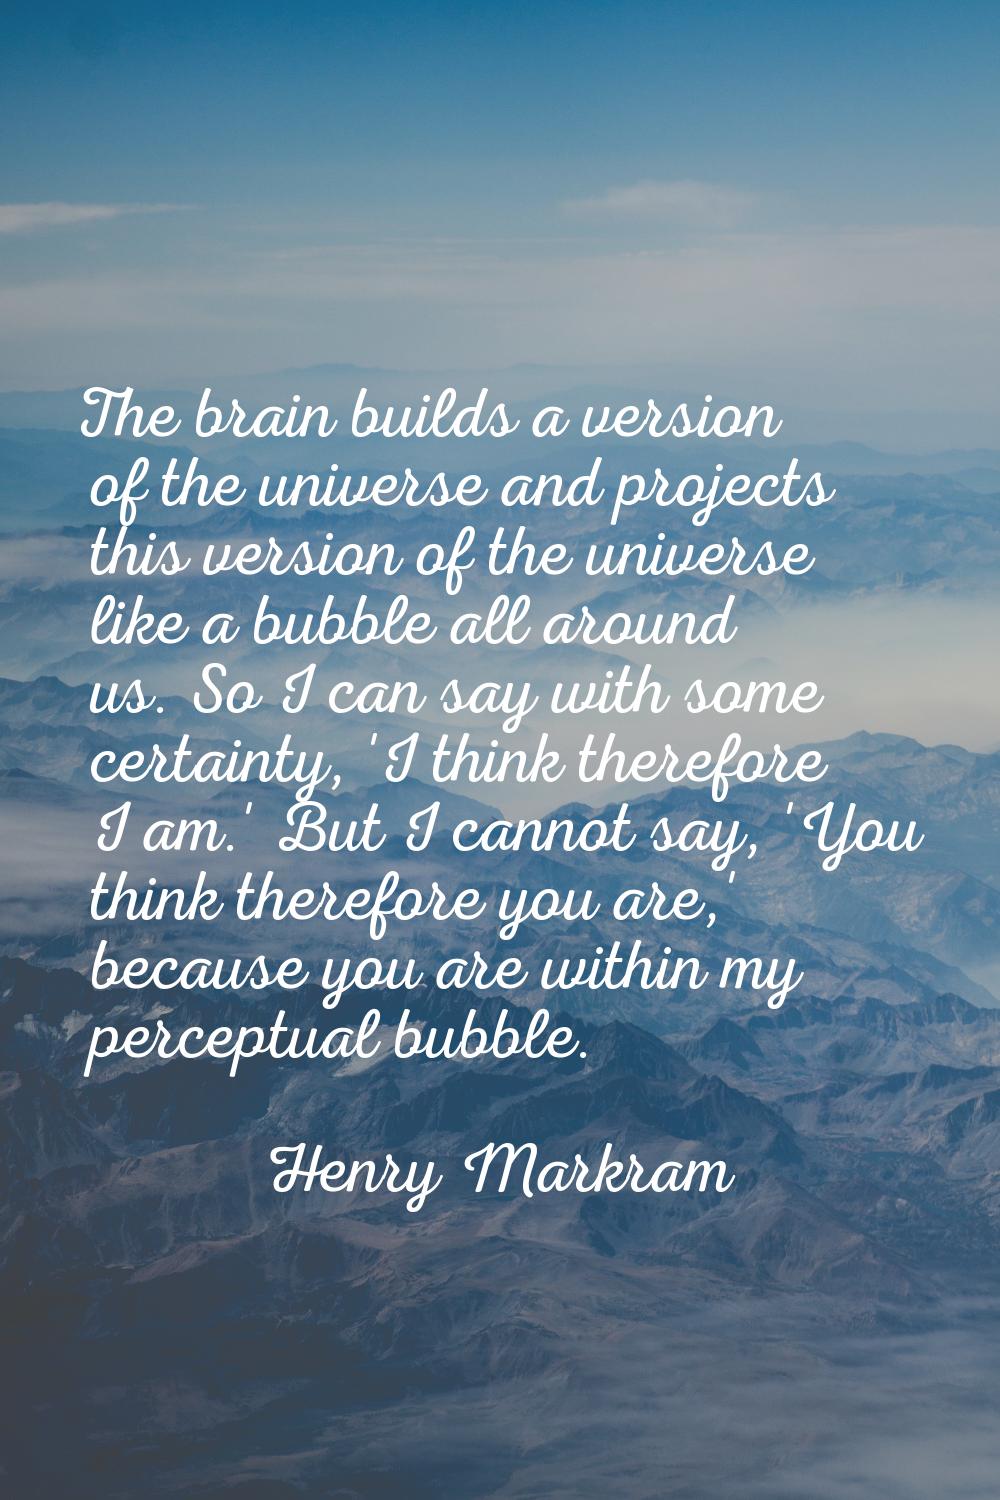 The brain builds a version of the universe and projects this version of the universe like a bubble 